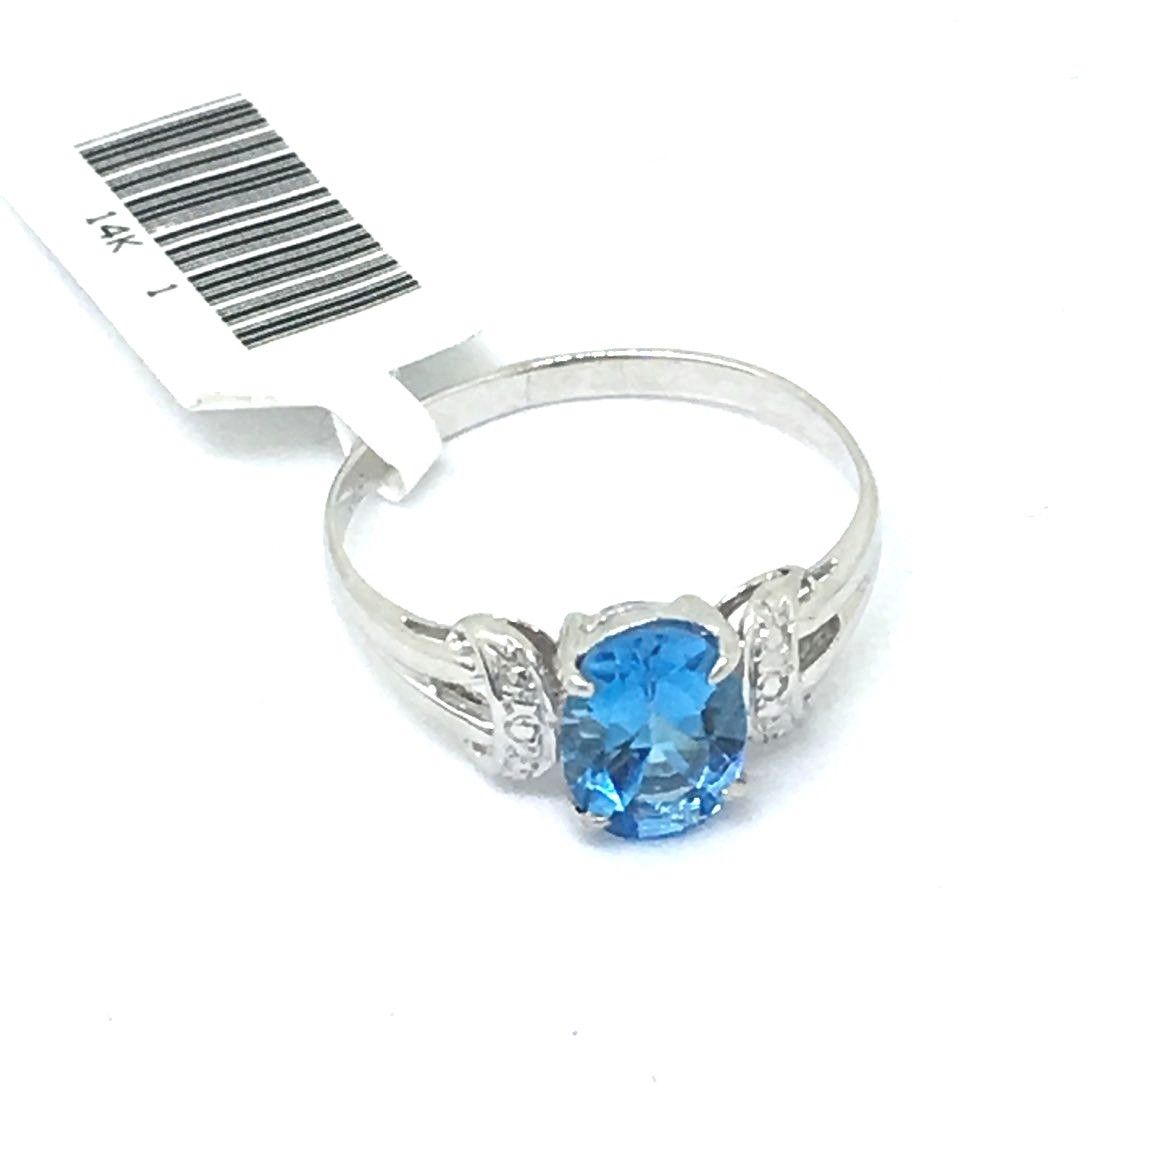 14K white gold and Genuine Oval 2.3 ct.Blue Topaz Ring $400 NWT Size 7 1/4